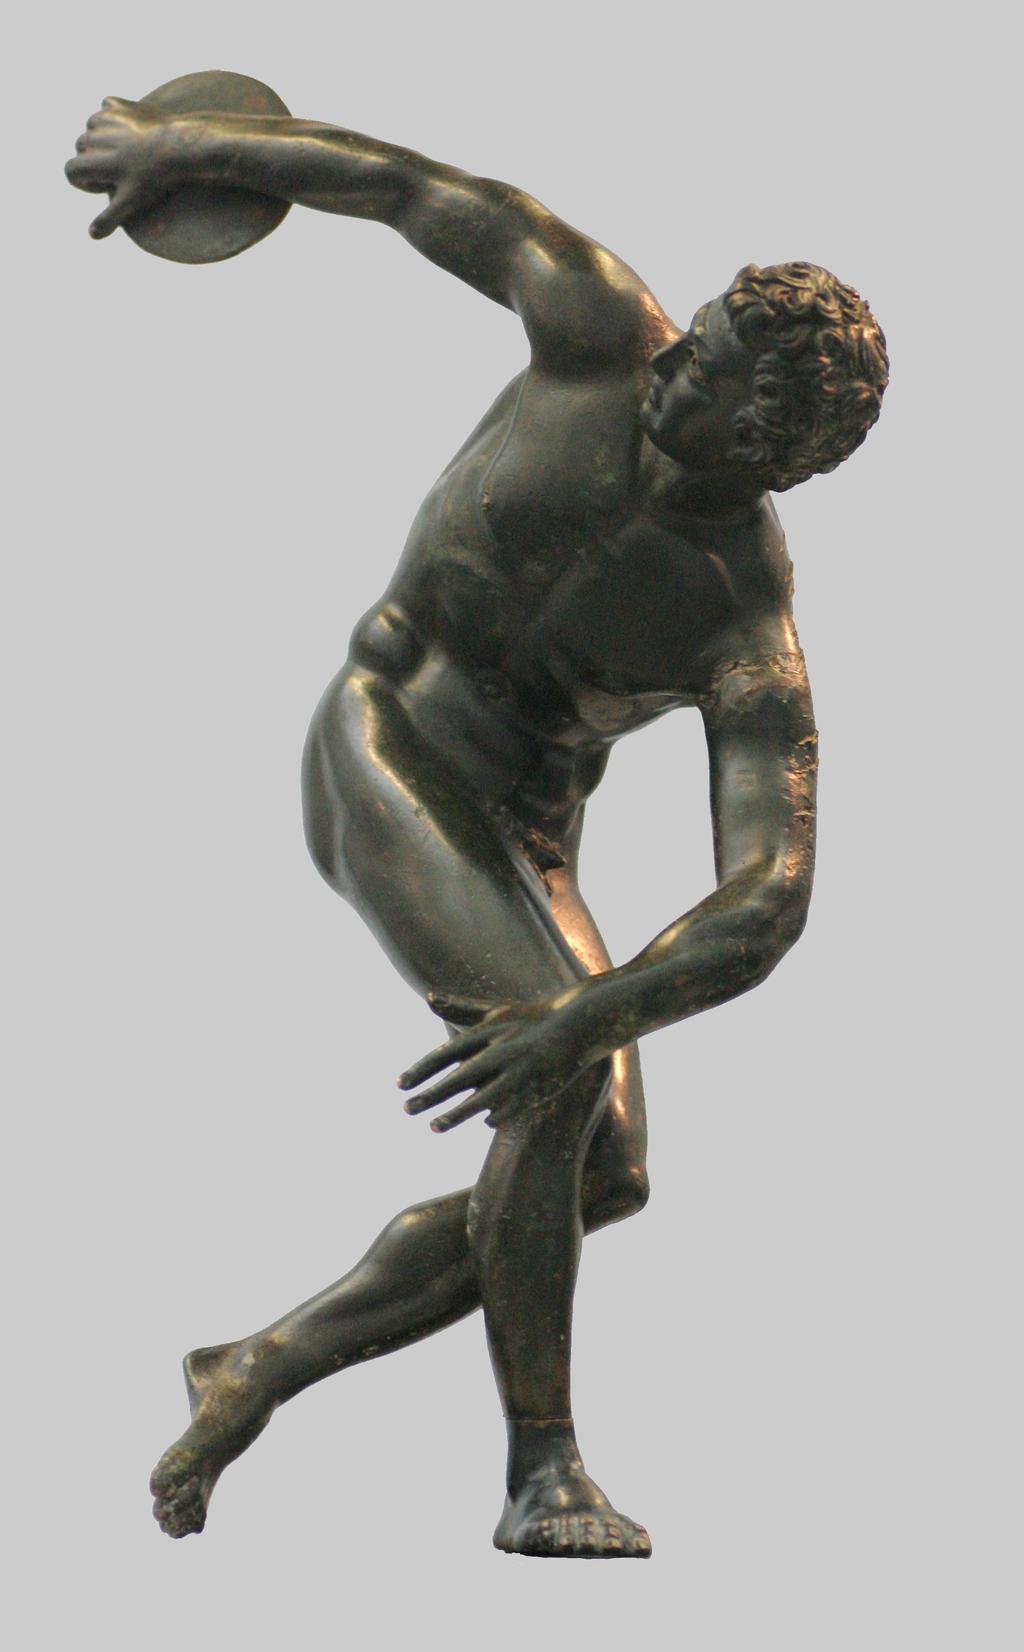 Statues of athletes Other statues showed humans in action, especially athletes doing sports. A good example is the "Discus Thrower," by Myron.